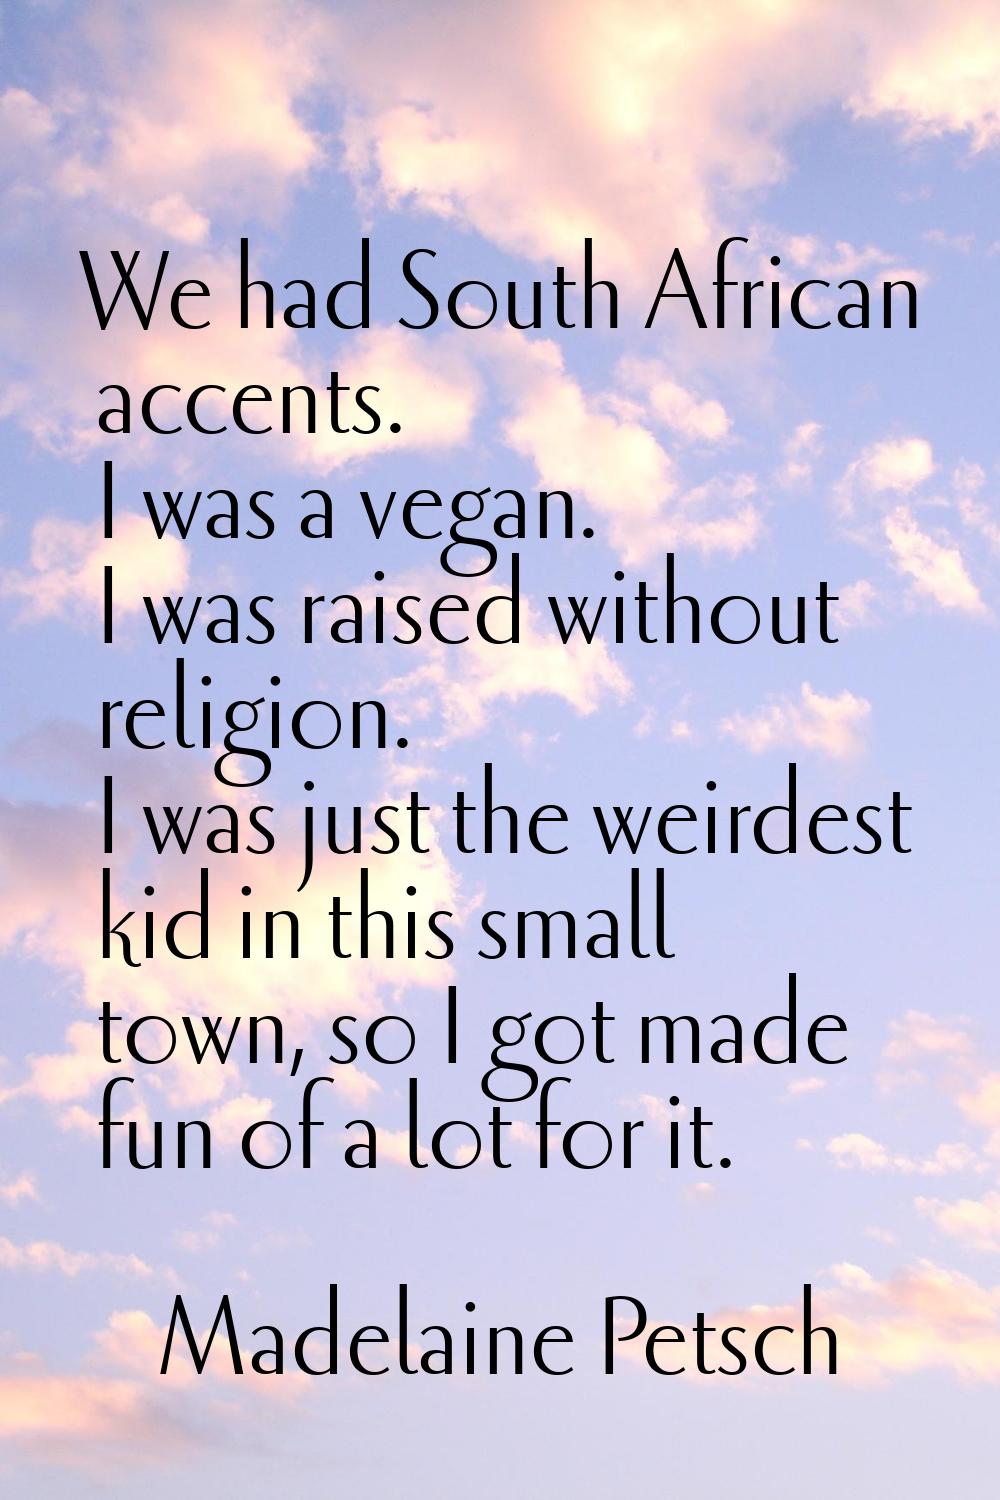 We had South African accents. I was a vegan. I was raised without religion. I was just the weirdest